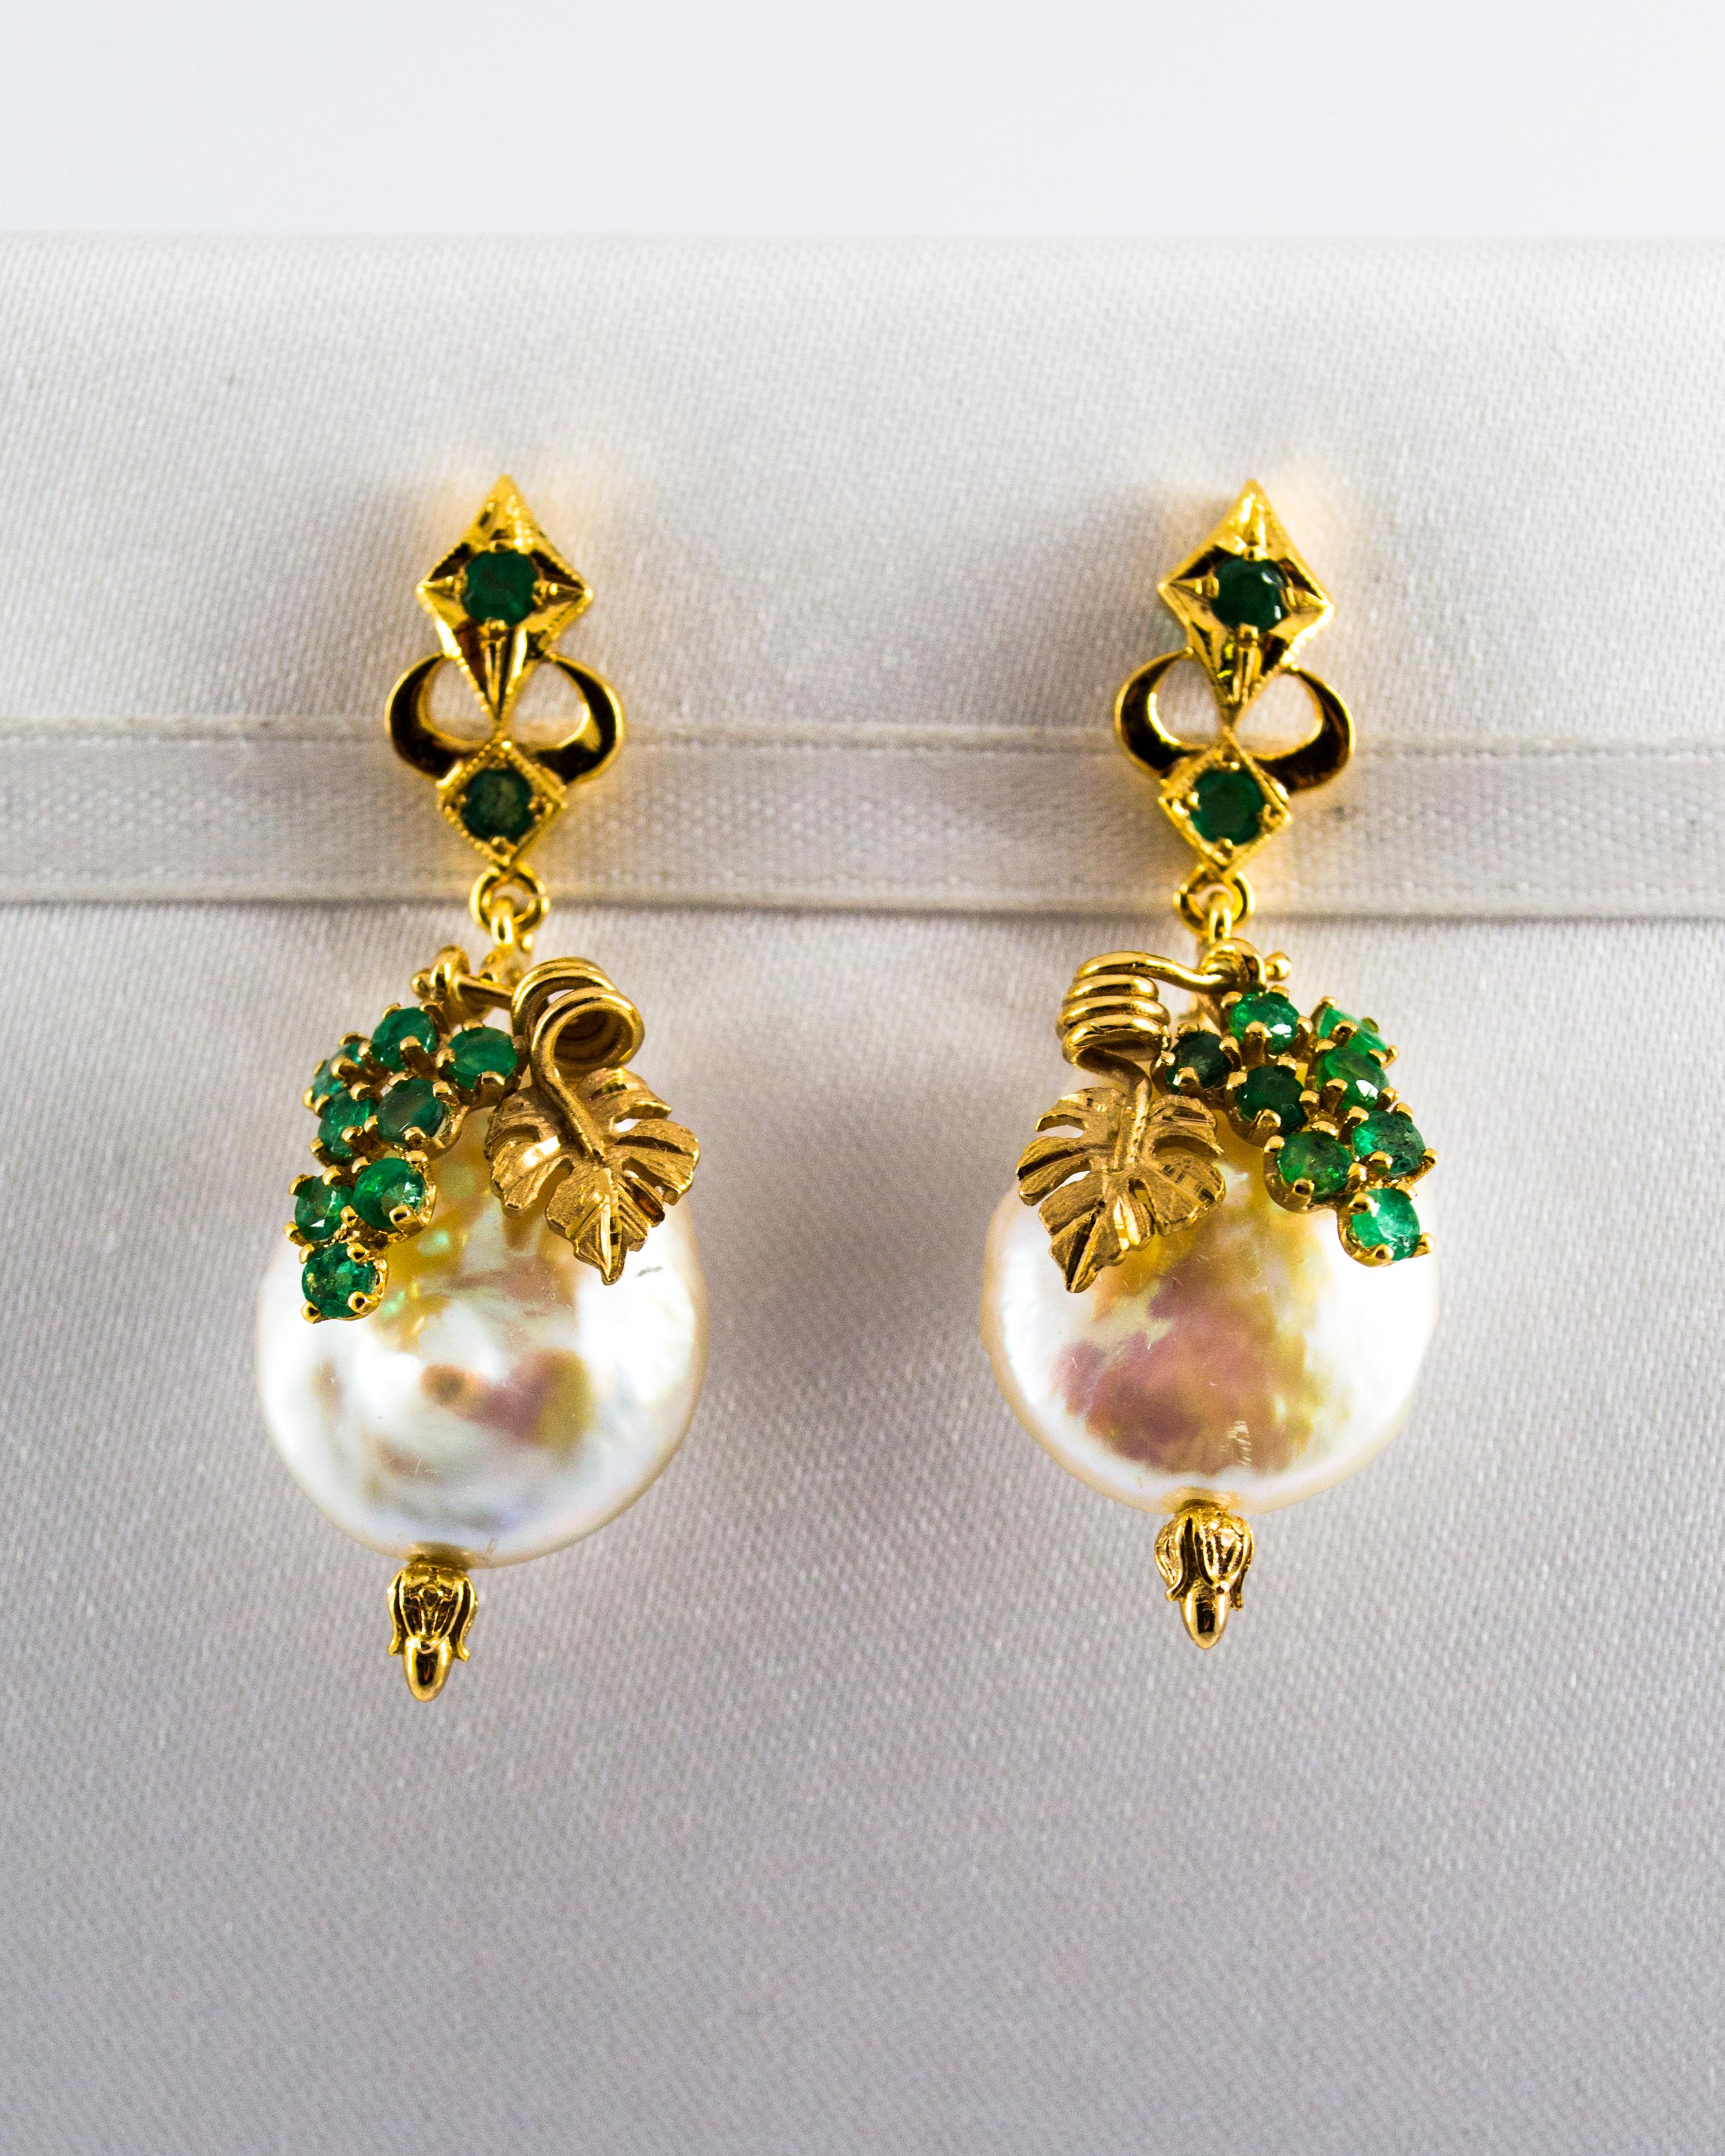 These earrings are made of 14K Yellow Gold.
They have 1.00 Carats of Emeralds, and Pearls.
With these earrings, Luigi Ferrara wanted to pay homage to the Roman deity Bacchus (In Greek mythology Dionisio).
All our Earrings have pins for pierced ears